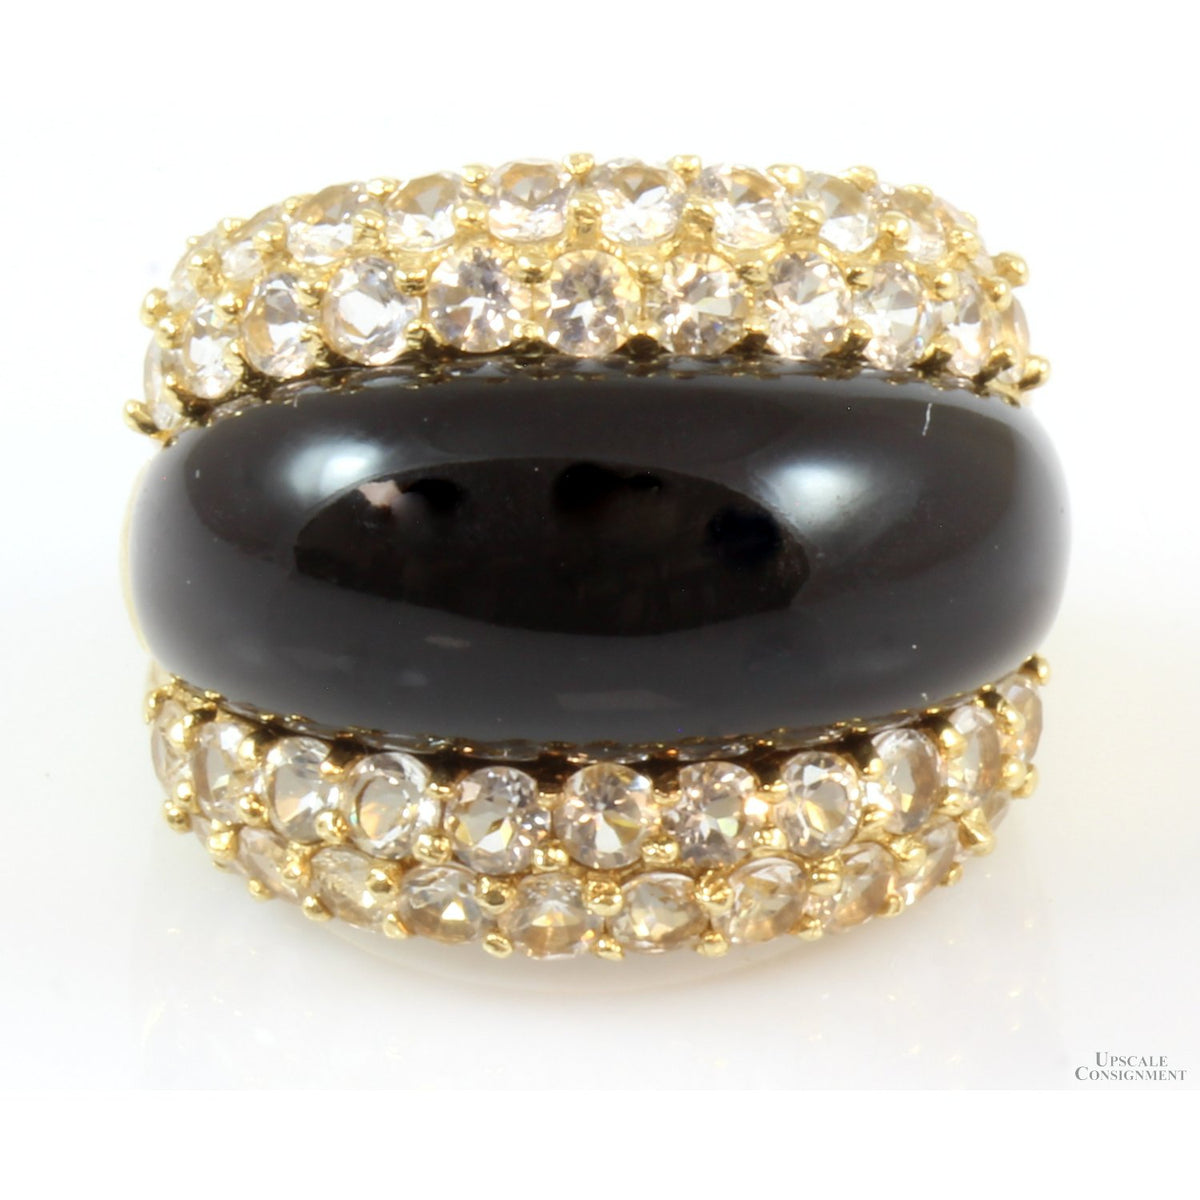 14K Gold Black Onyx & Colorless Topaz Dome Ring